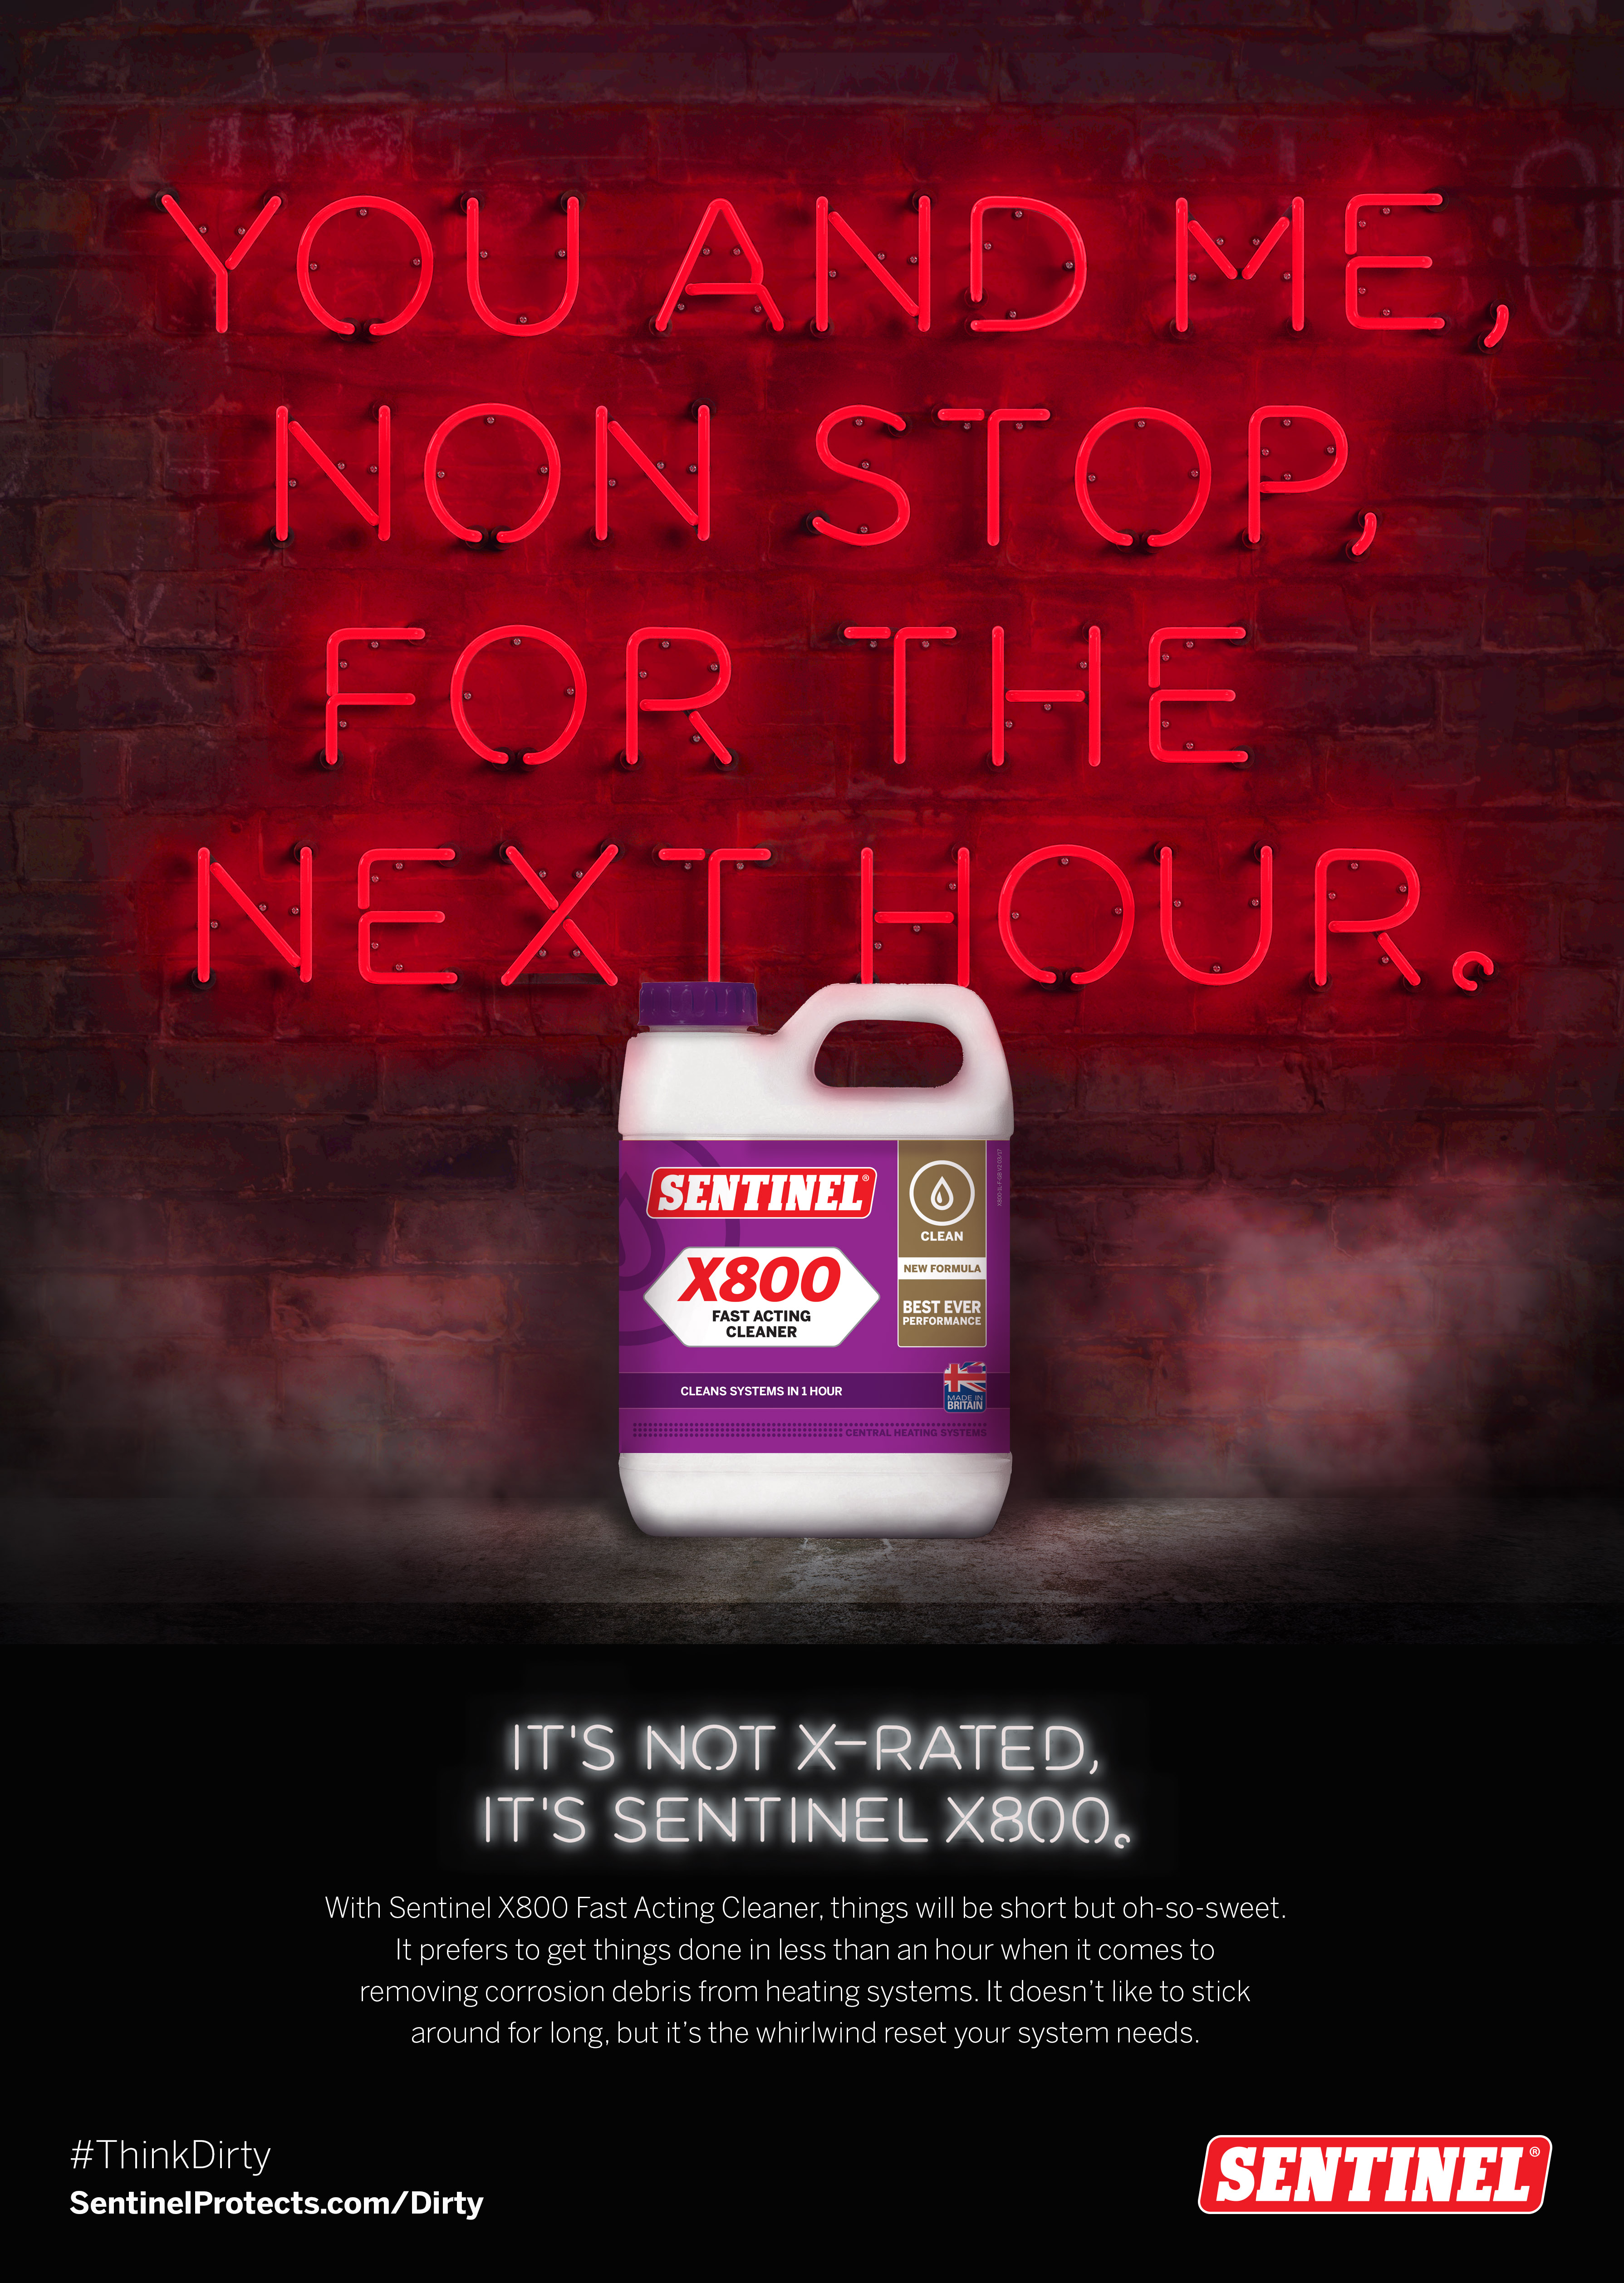 You and me, non stop example - Sentinel Dirty Campaign